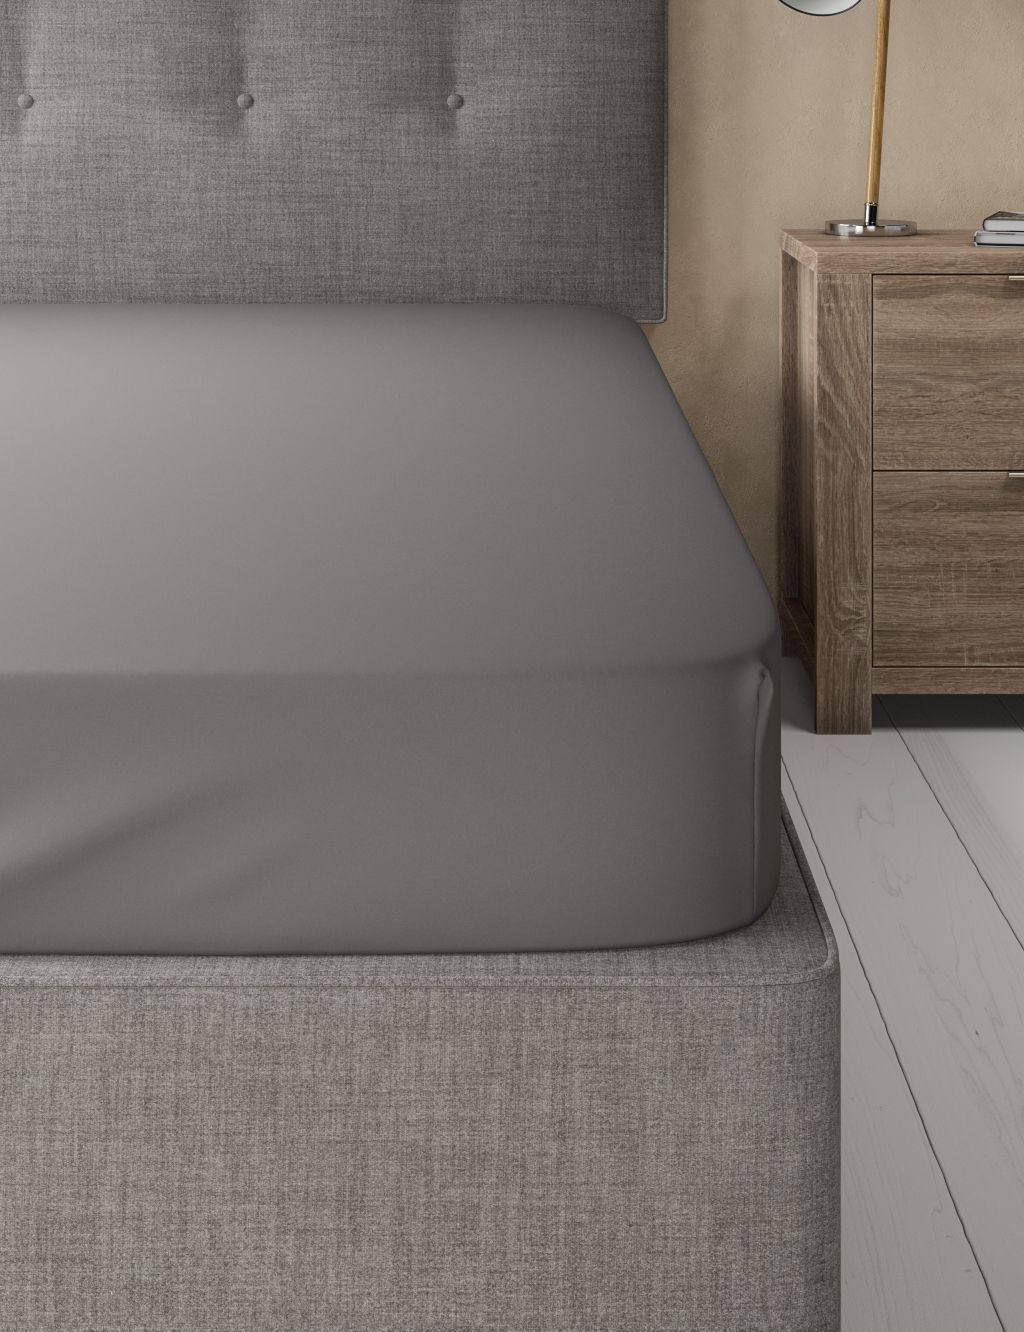 Cotton Rich Percale Fitted Sheet